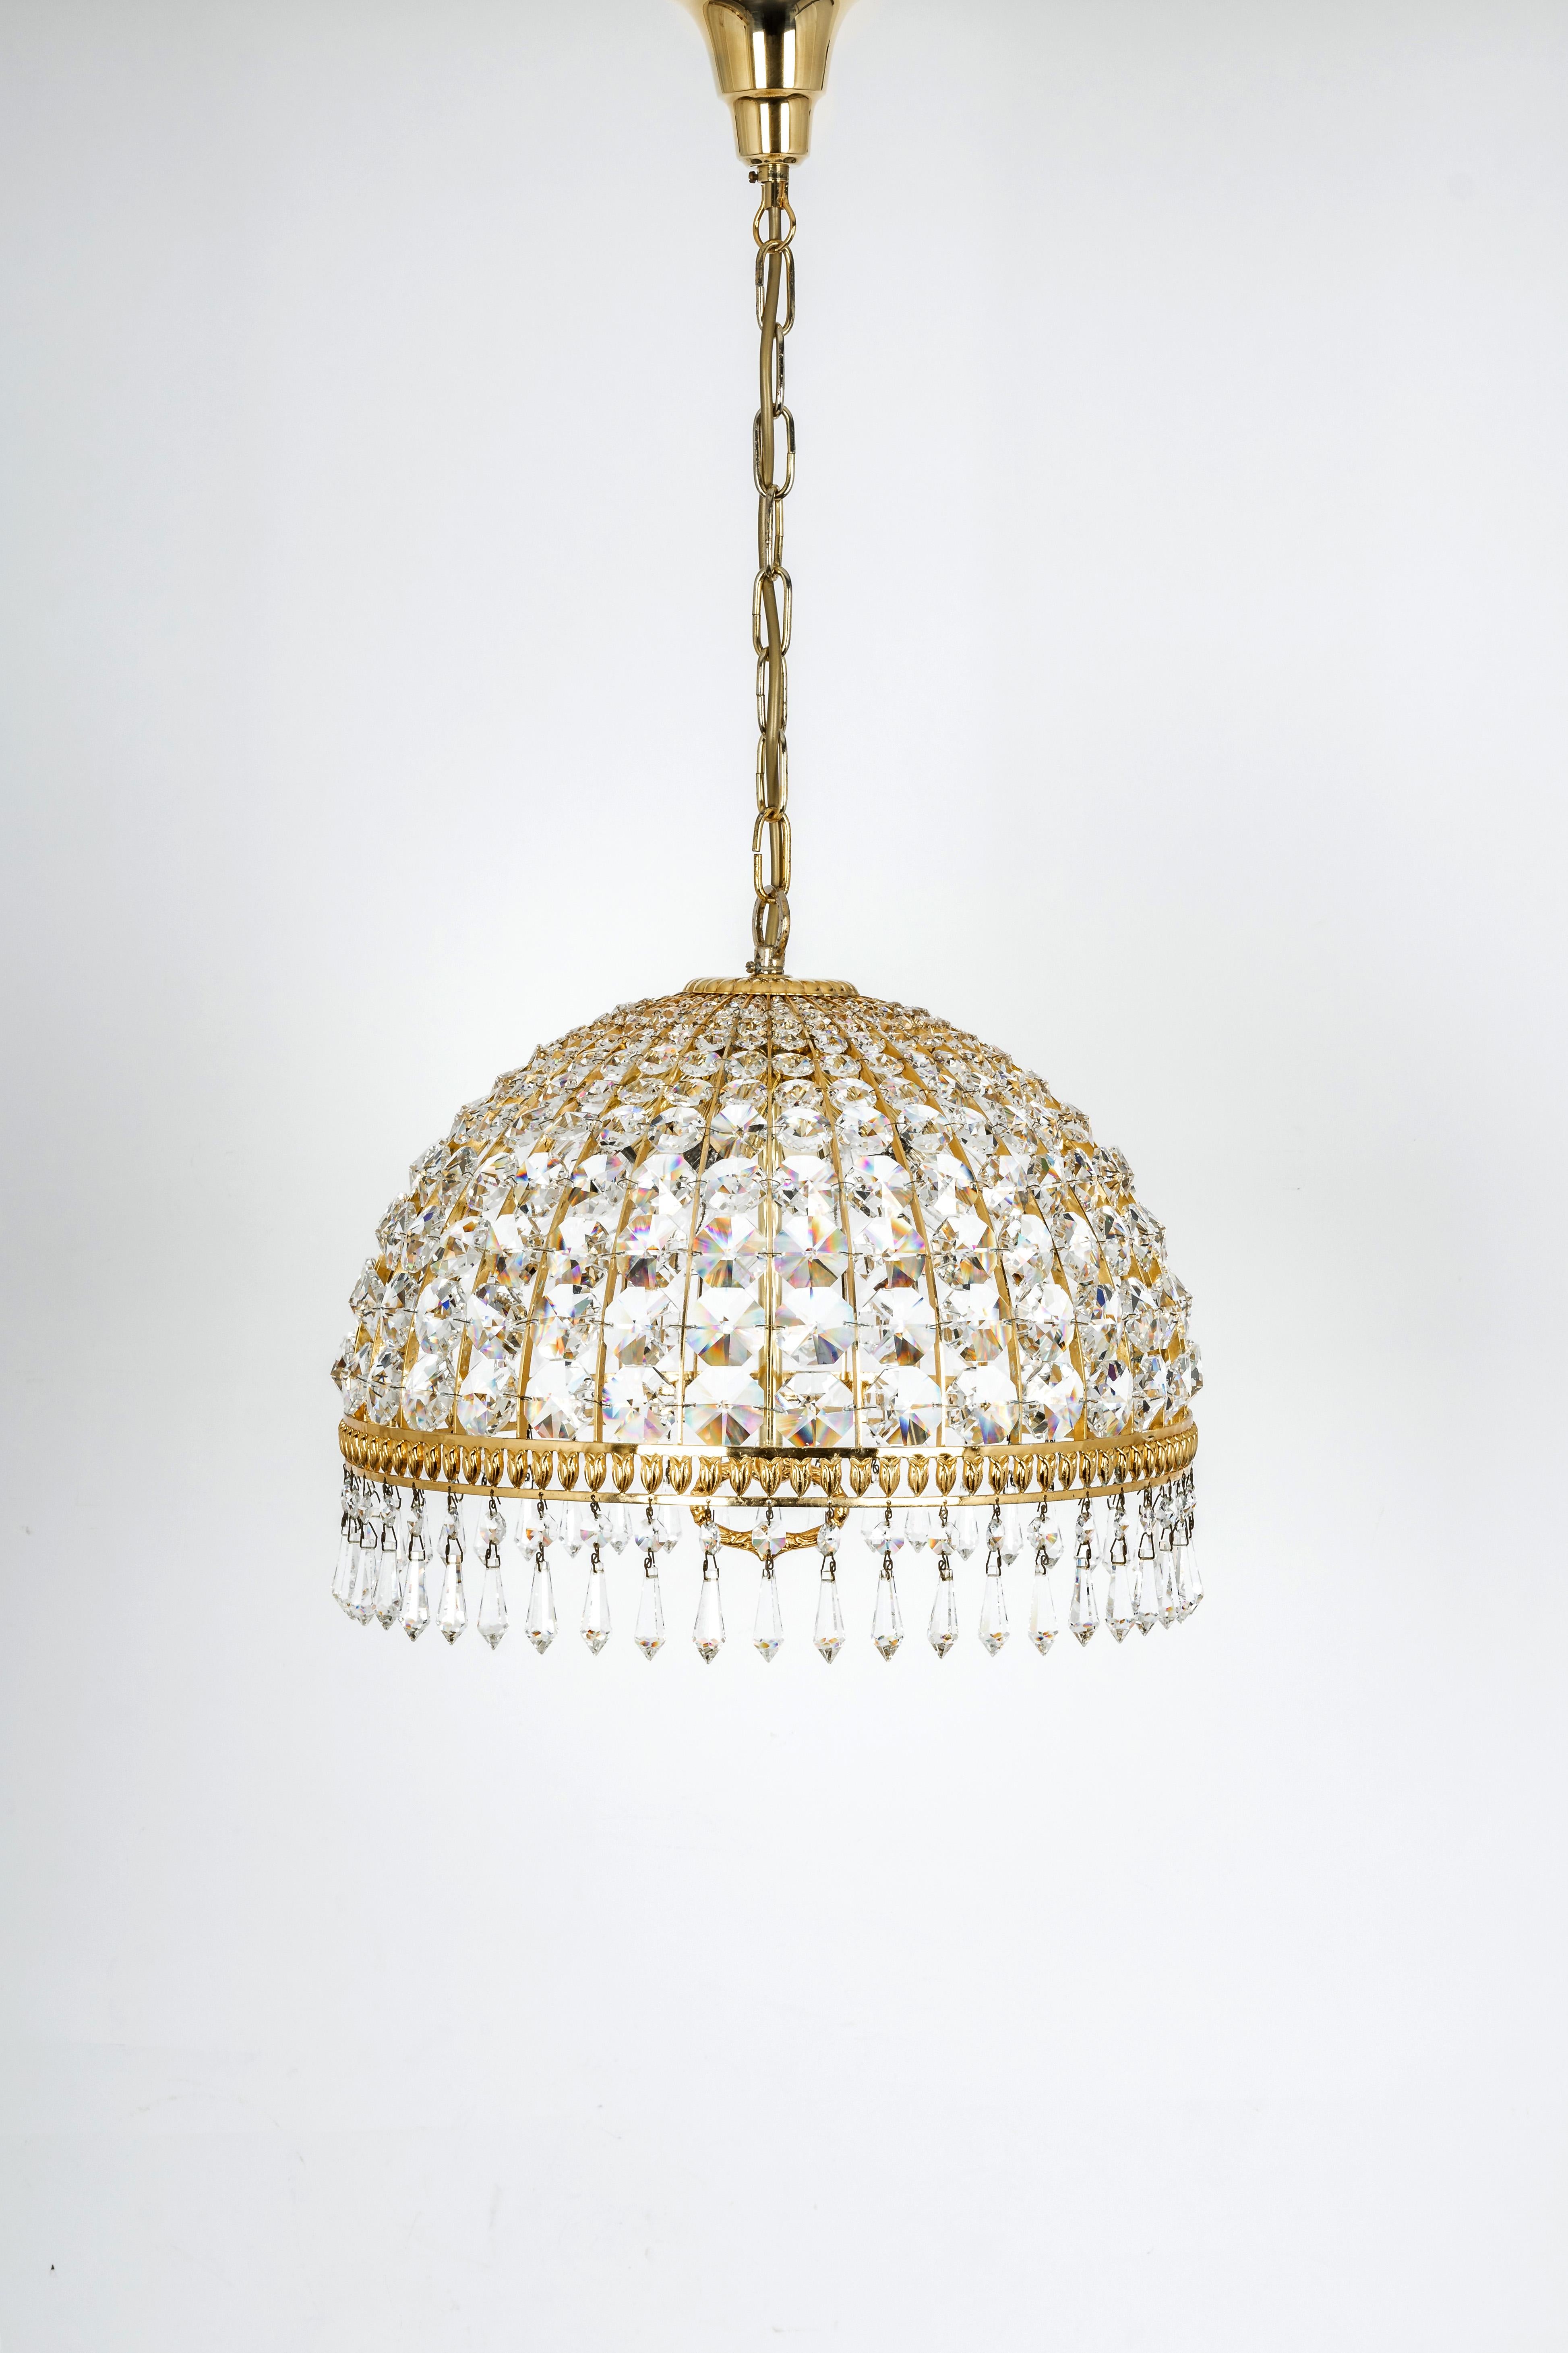 A wonderful and high-quality brass chandelier by Palwa, Germany, 1970s.
It is made of a brass frame and many crystals. Great scale and exquisite detail.

The lamp takes 6 x E14 (small Bulbs up to 40 Watts each)
Light bulbs are not included. It